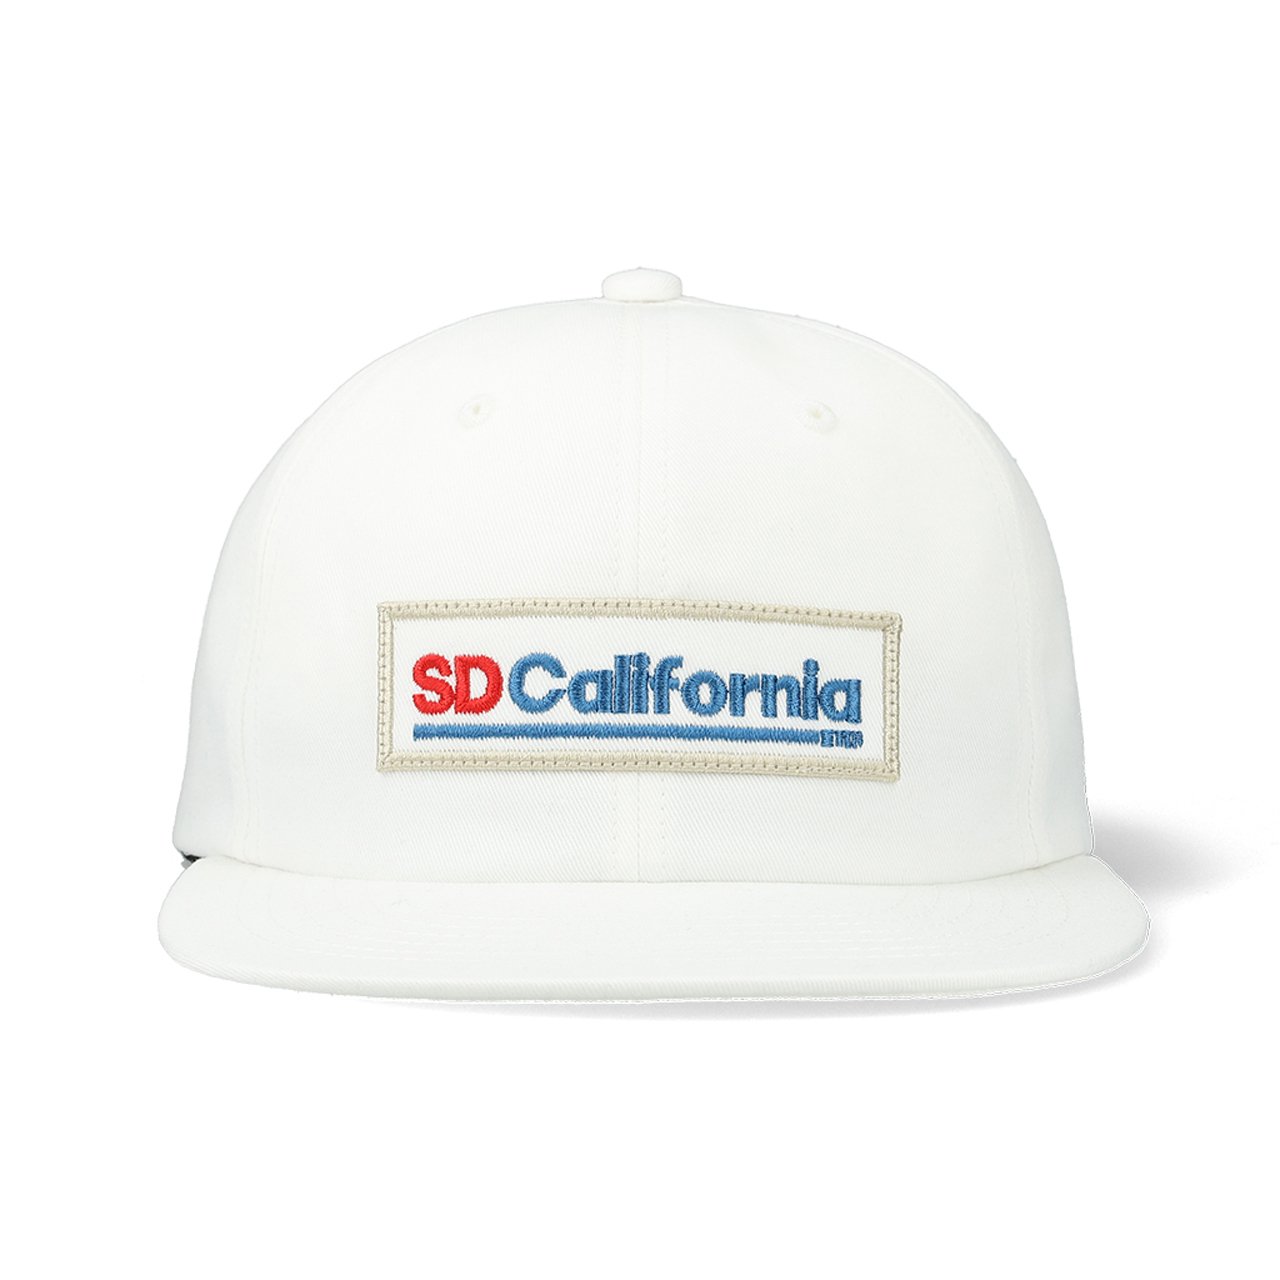 <img class='new_mark_img1' src='https://img.shop-pro.jp/img/new/icons5.gif' style='border:none;display:inline;margin:0px;padding:0px;width:auto;' />STANDARD CALIFORNIA ( ե˥)Logo Patch Twill Cap White